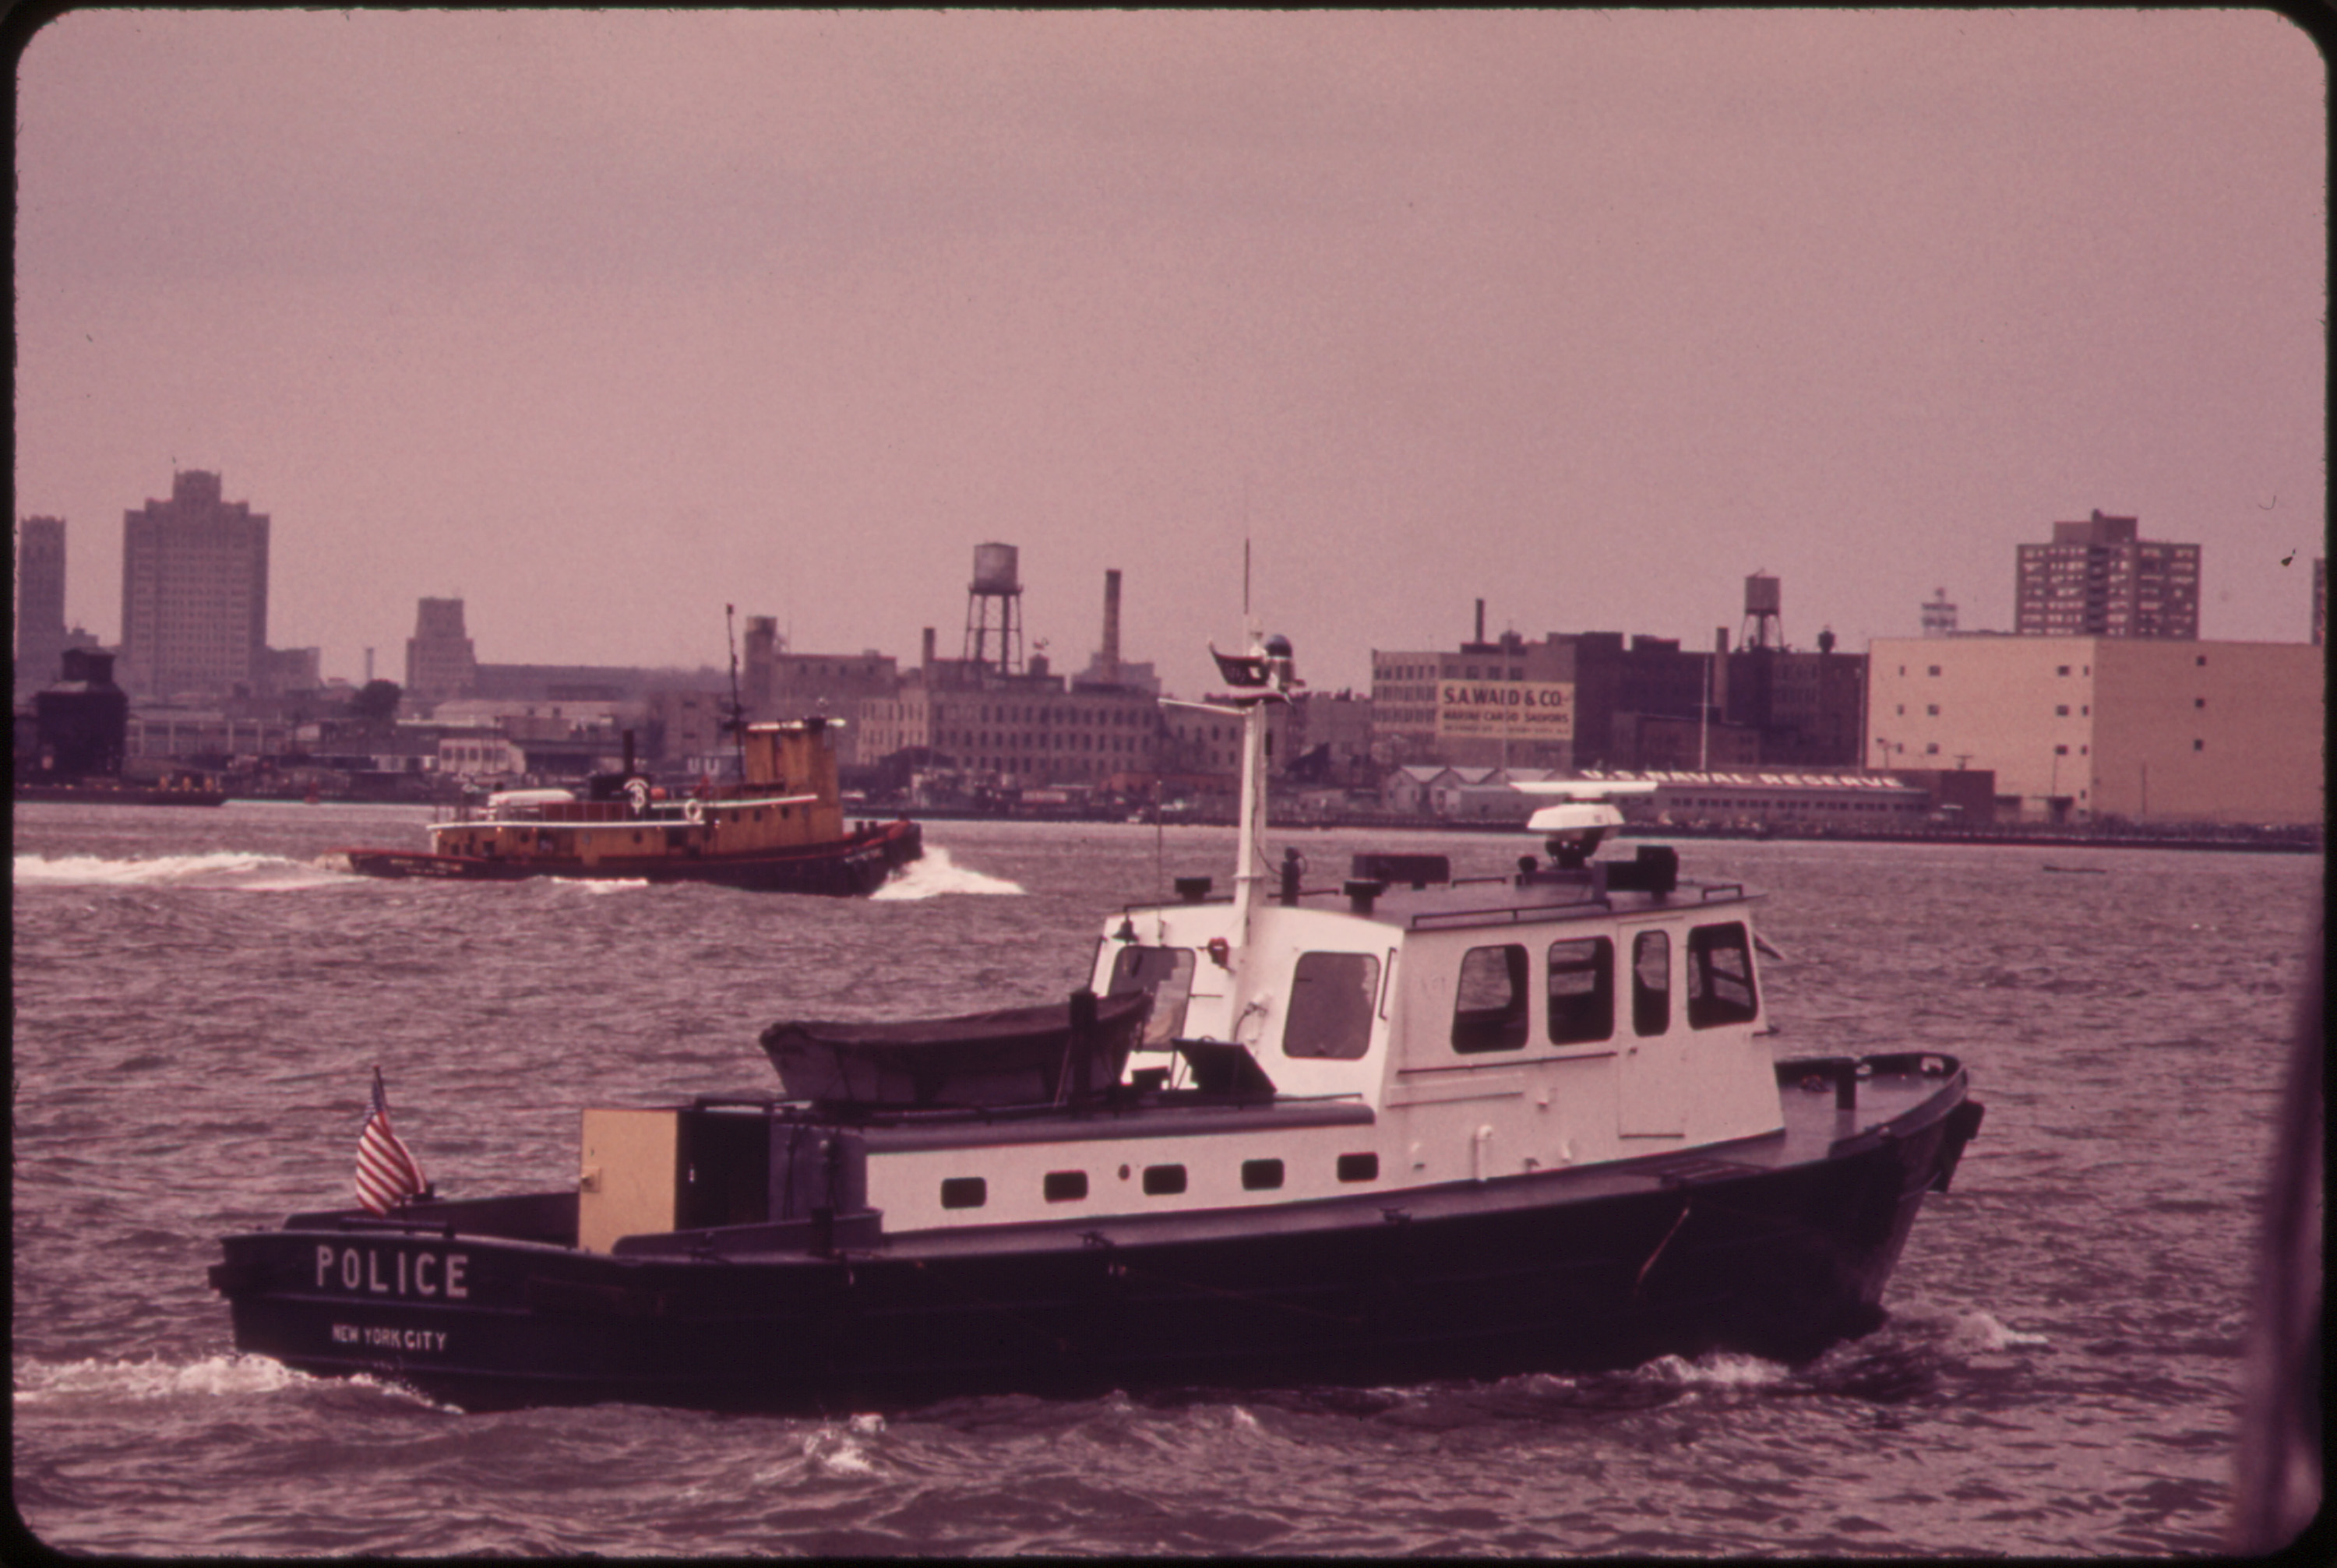 Police Launch on Patrol on the Hudson River off Battery Park on the Lower Tip of Manhattan 05/1973